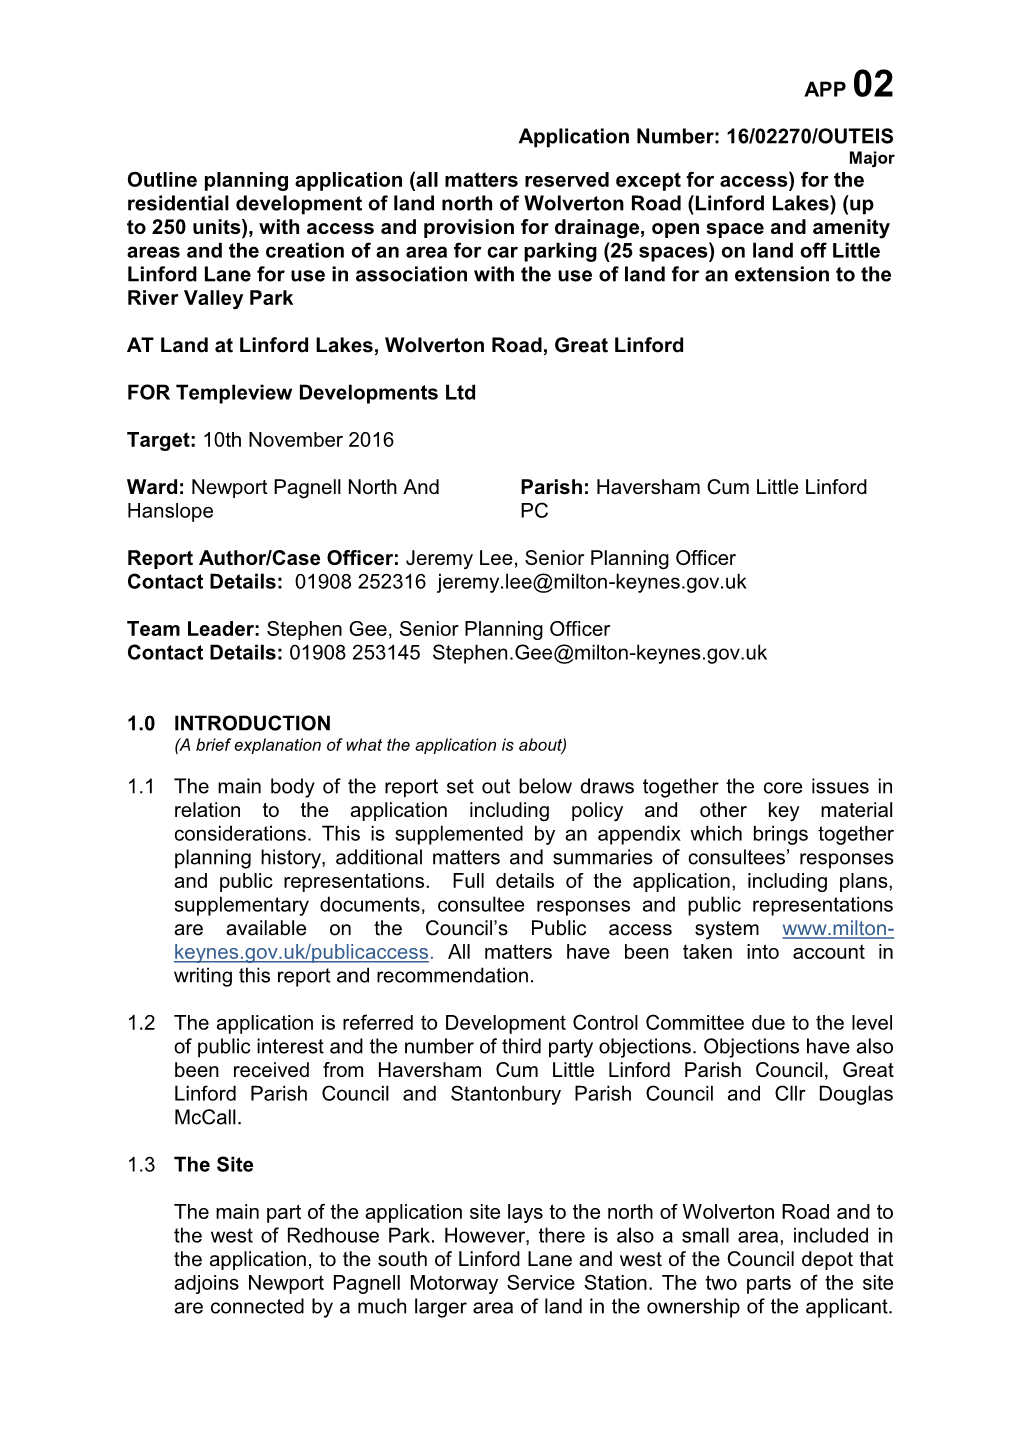 16/02270/OUTEIS Outline Planning Application (All Matters Reserved